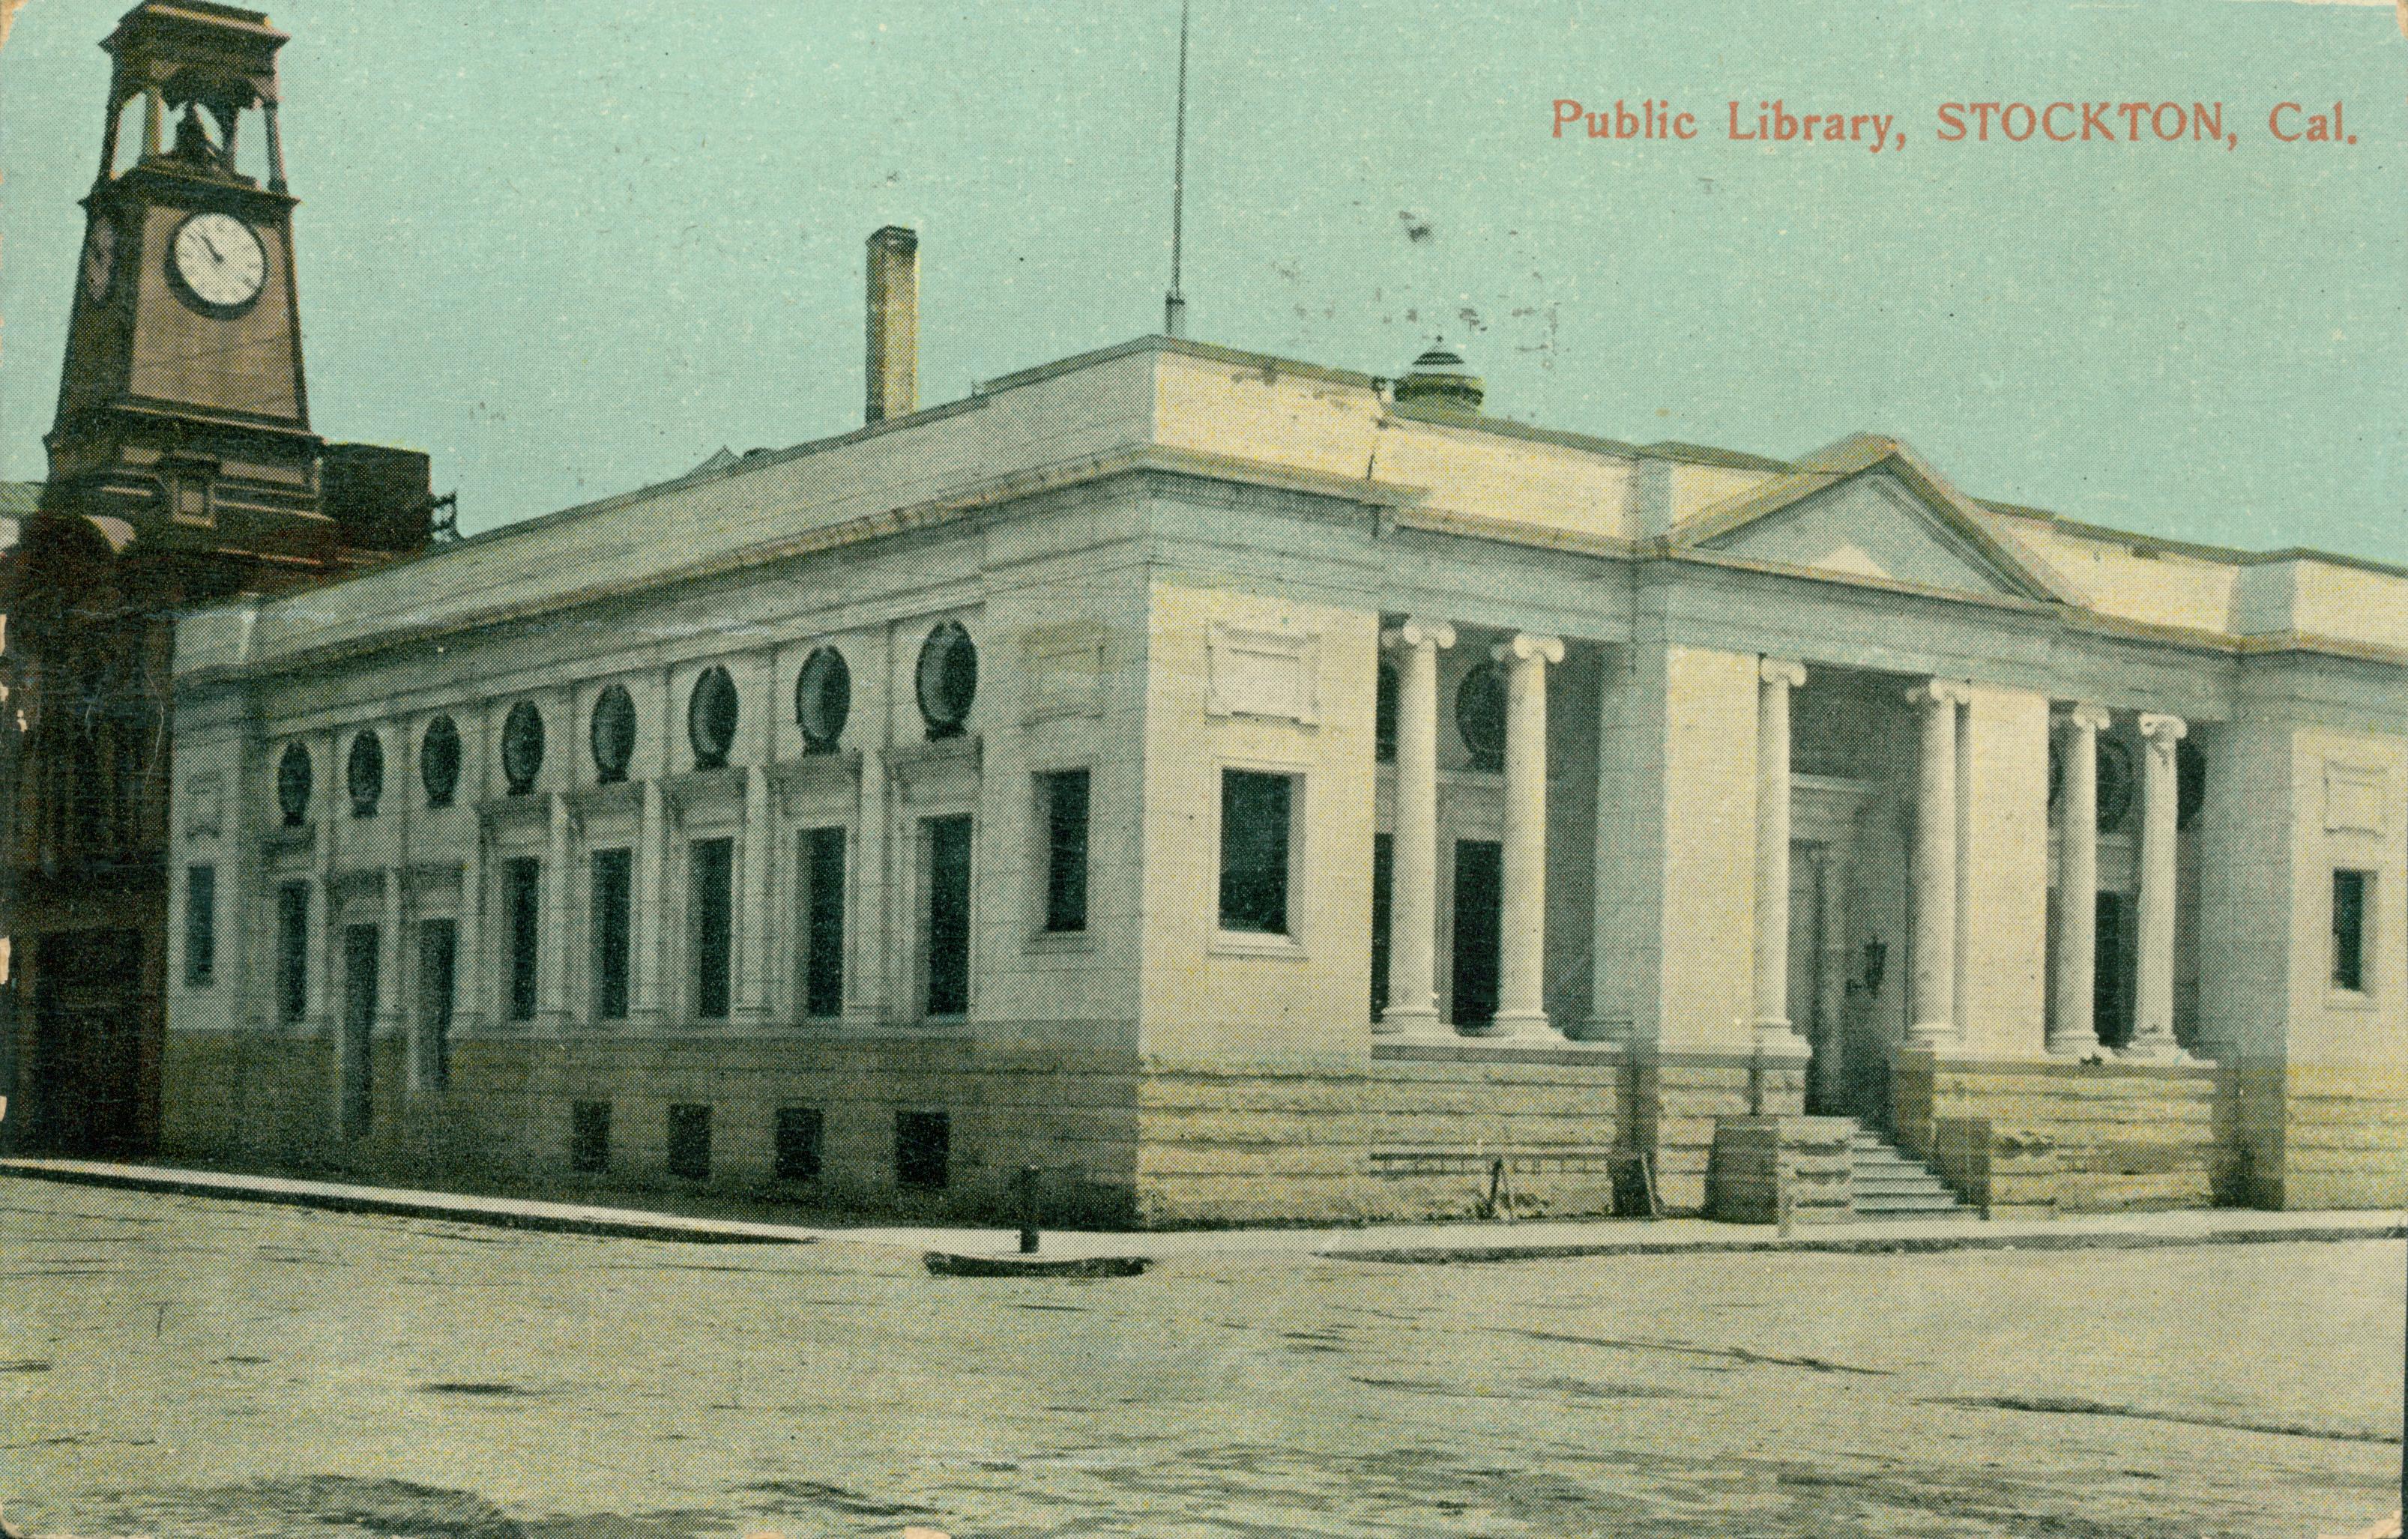 Exterior view of the Public Library in Stockton, Cal